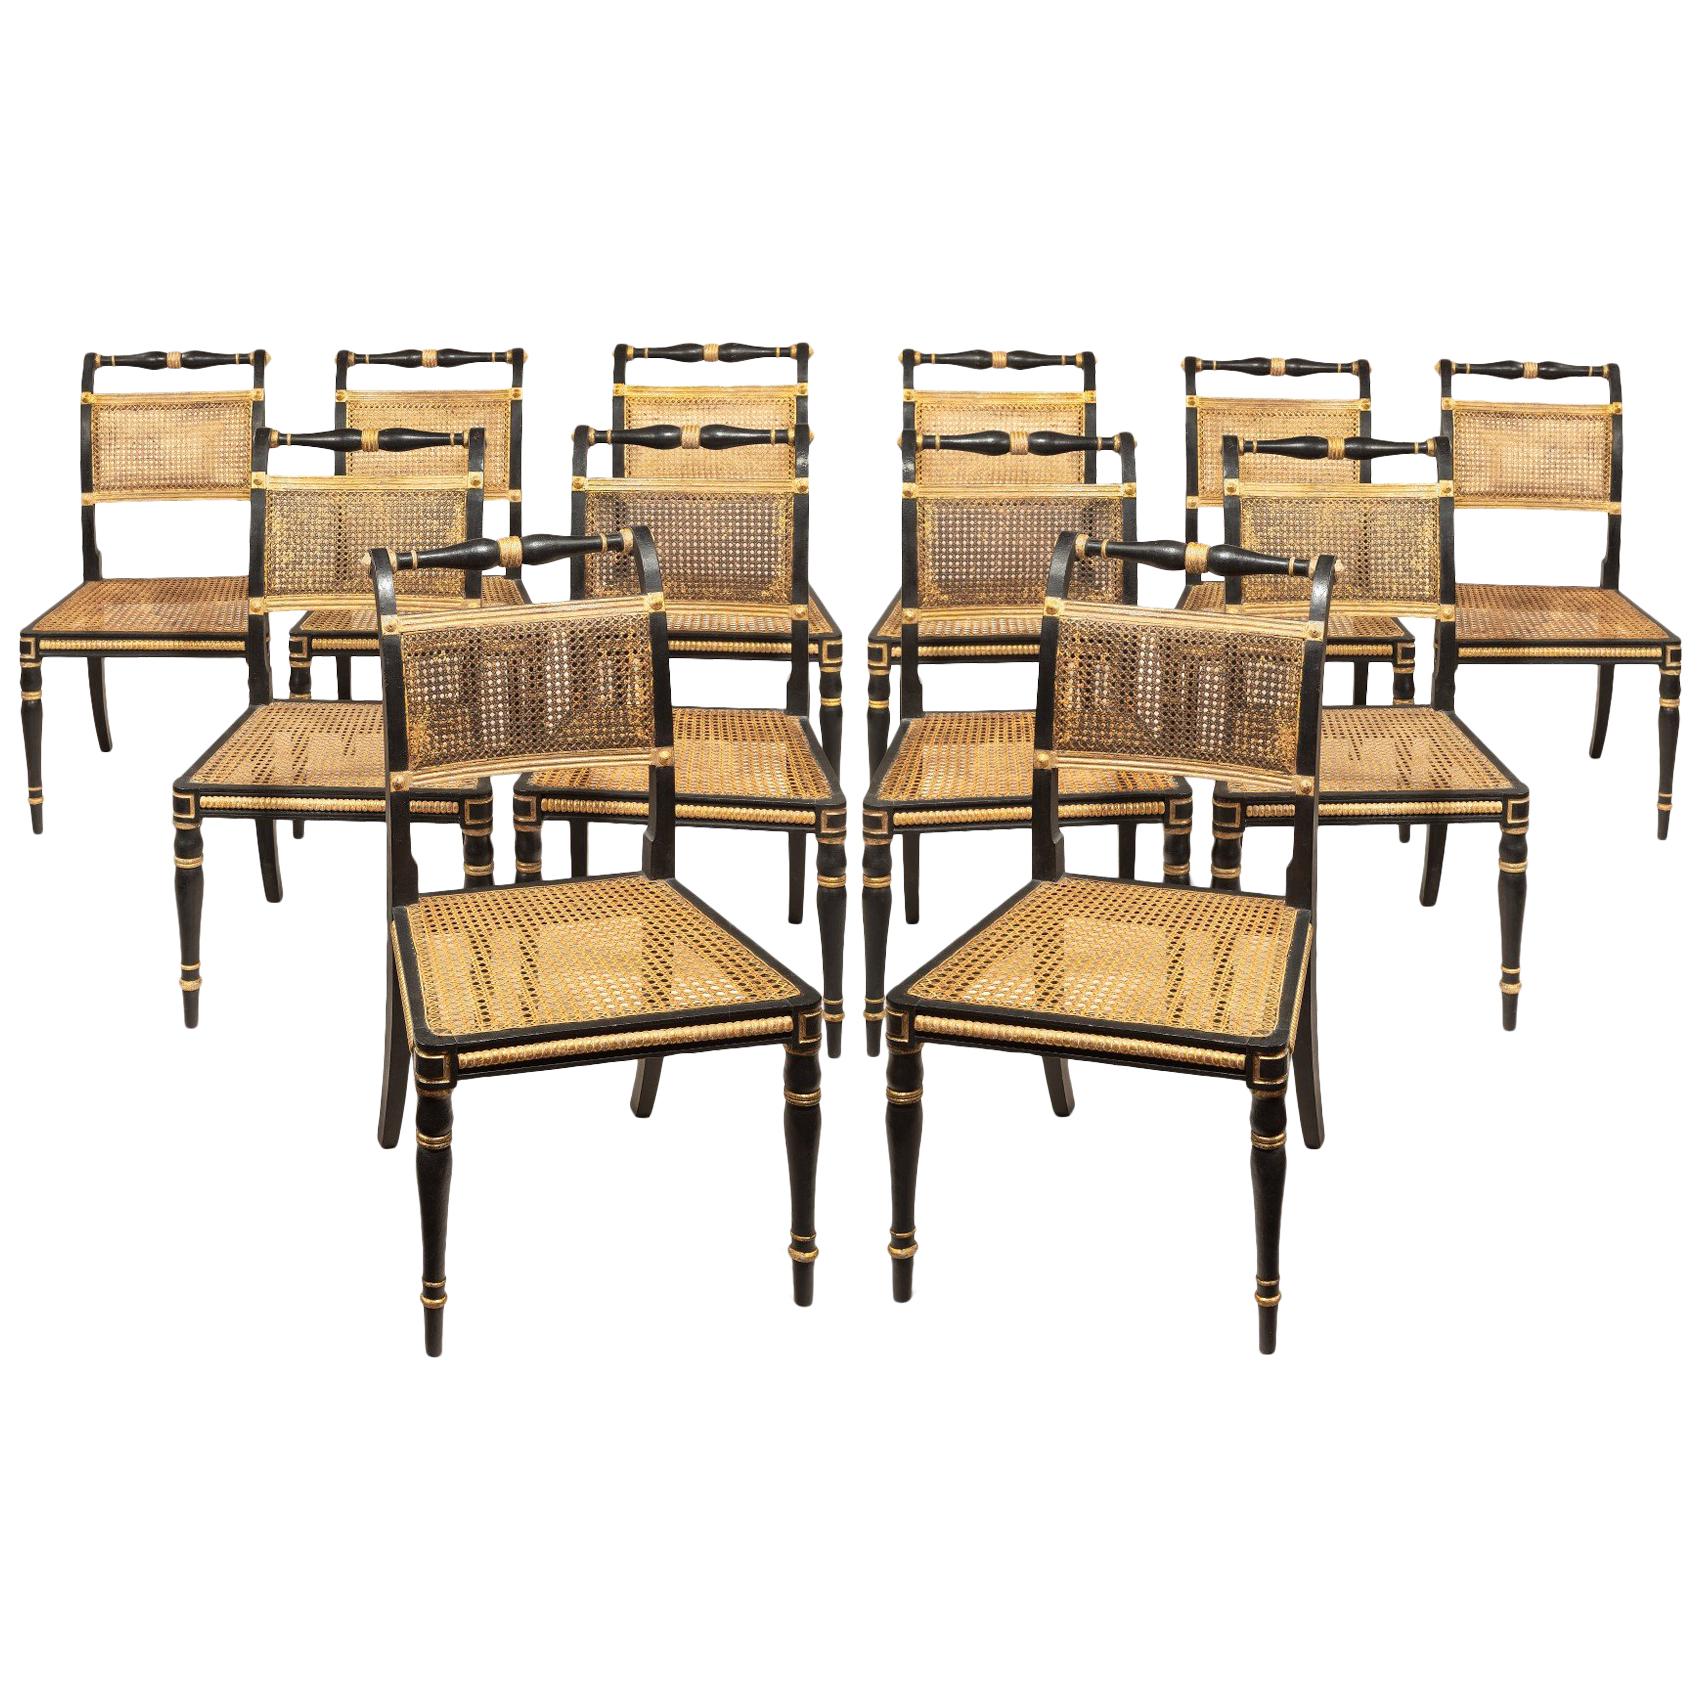 Set of Twelve Regency Dining Chairs in Ebonized and Gilded Decoration